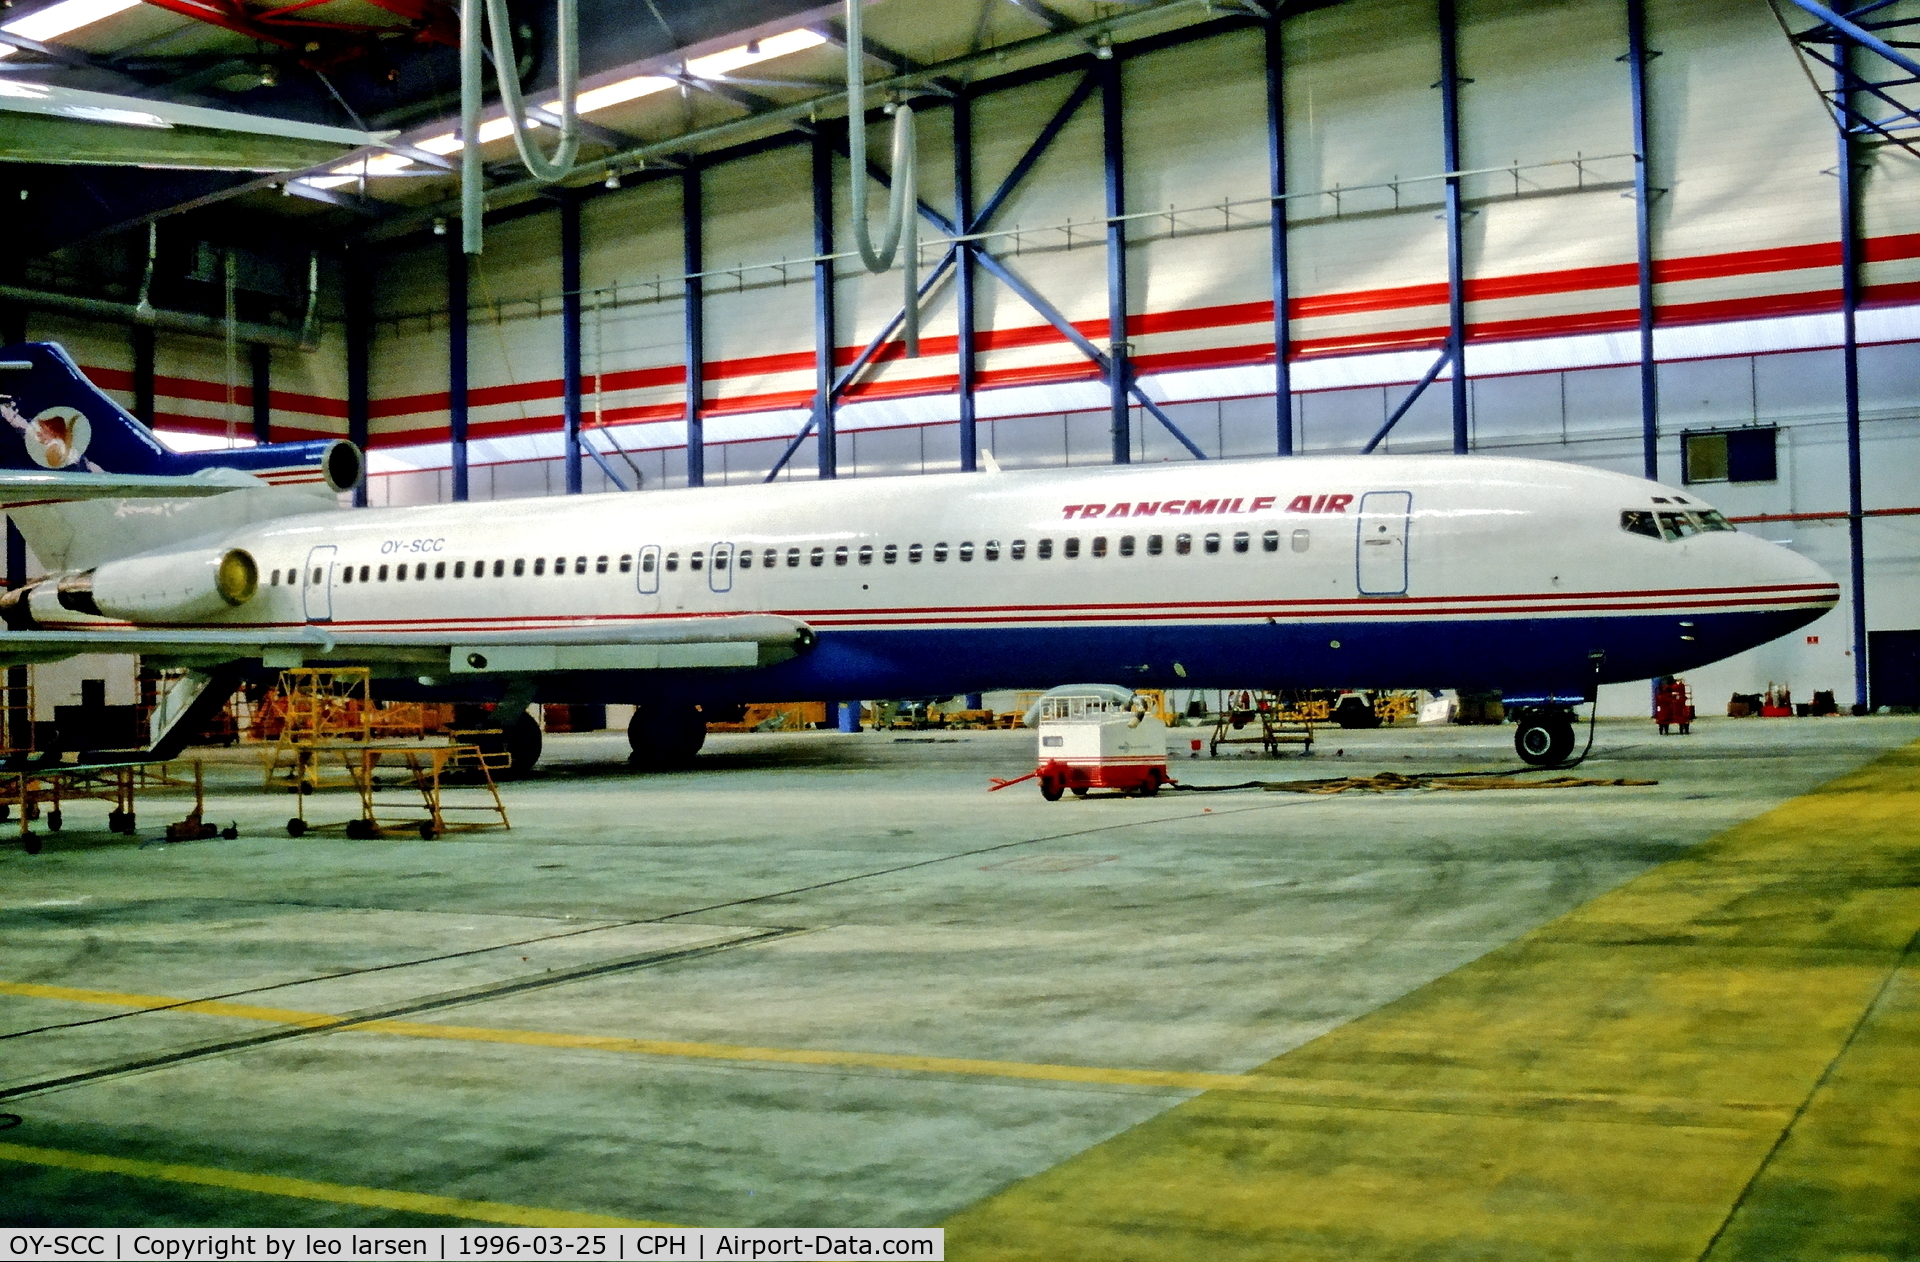 OY-SCC, 1979 Boeing 727-212 C/N 21945, Copenhagen 25.3.1996 after lease to Transmile Air , Malaysia.